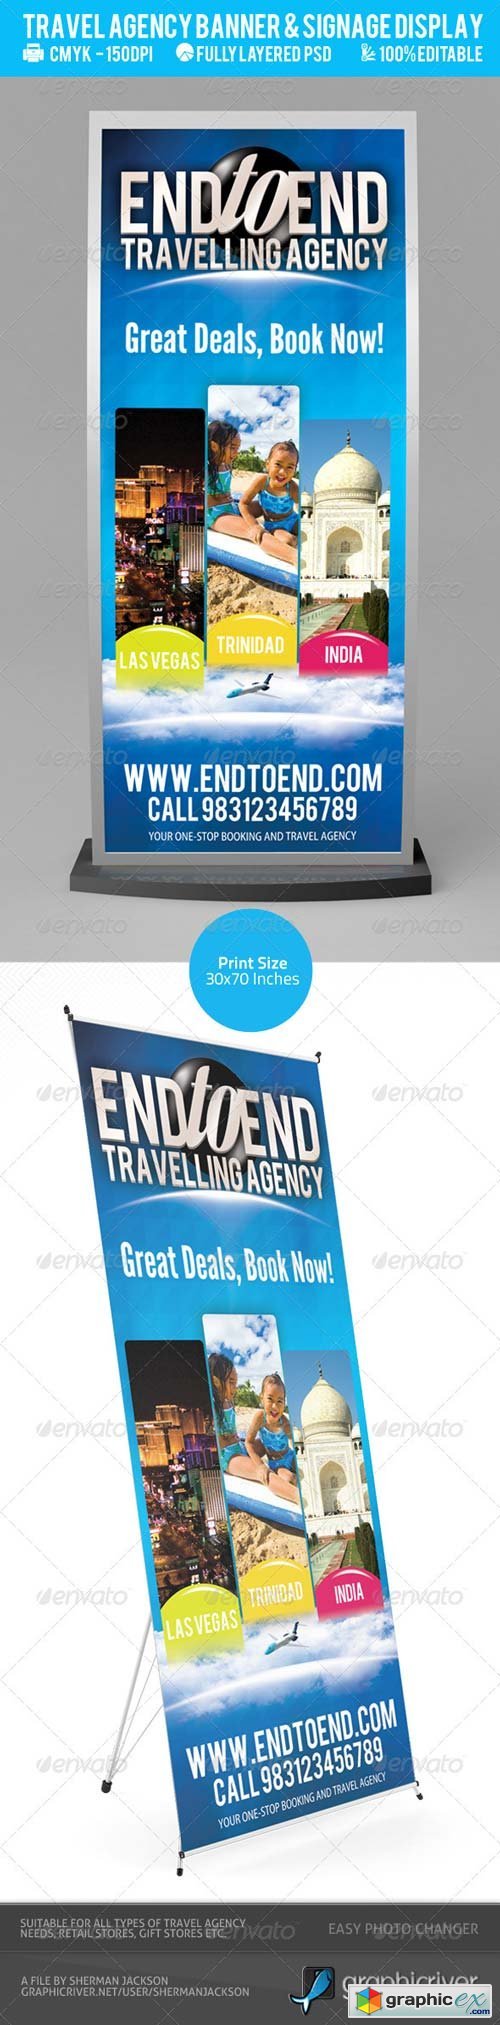 Travel Agency Banner & Signage Display PSD